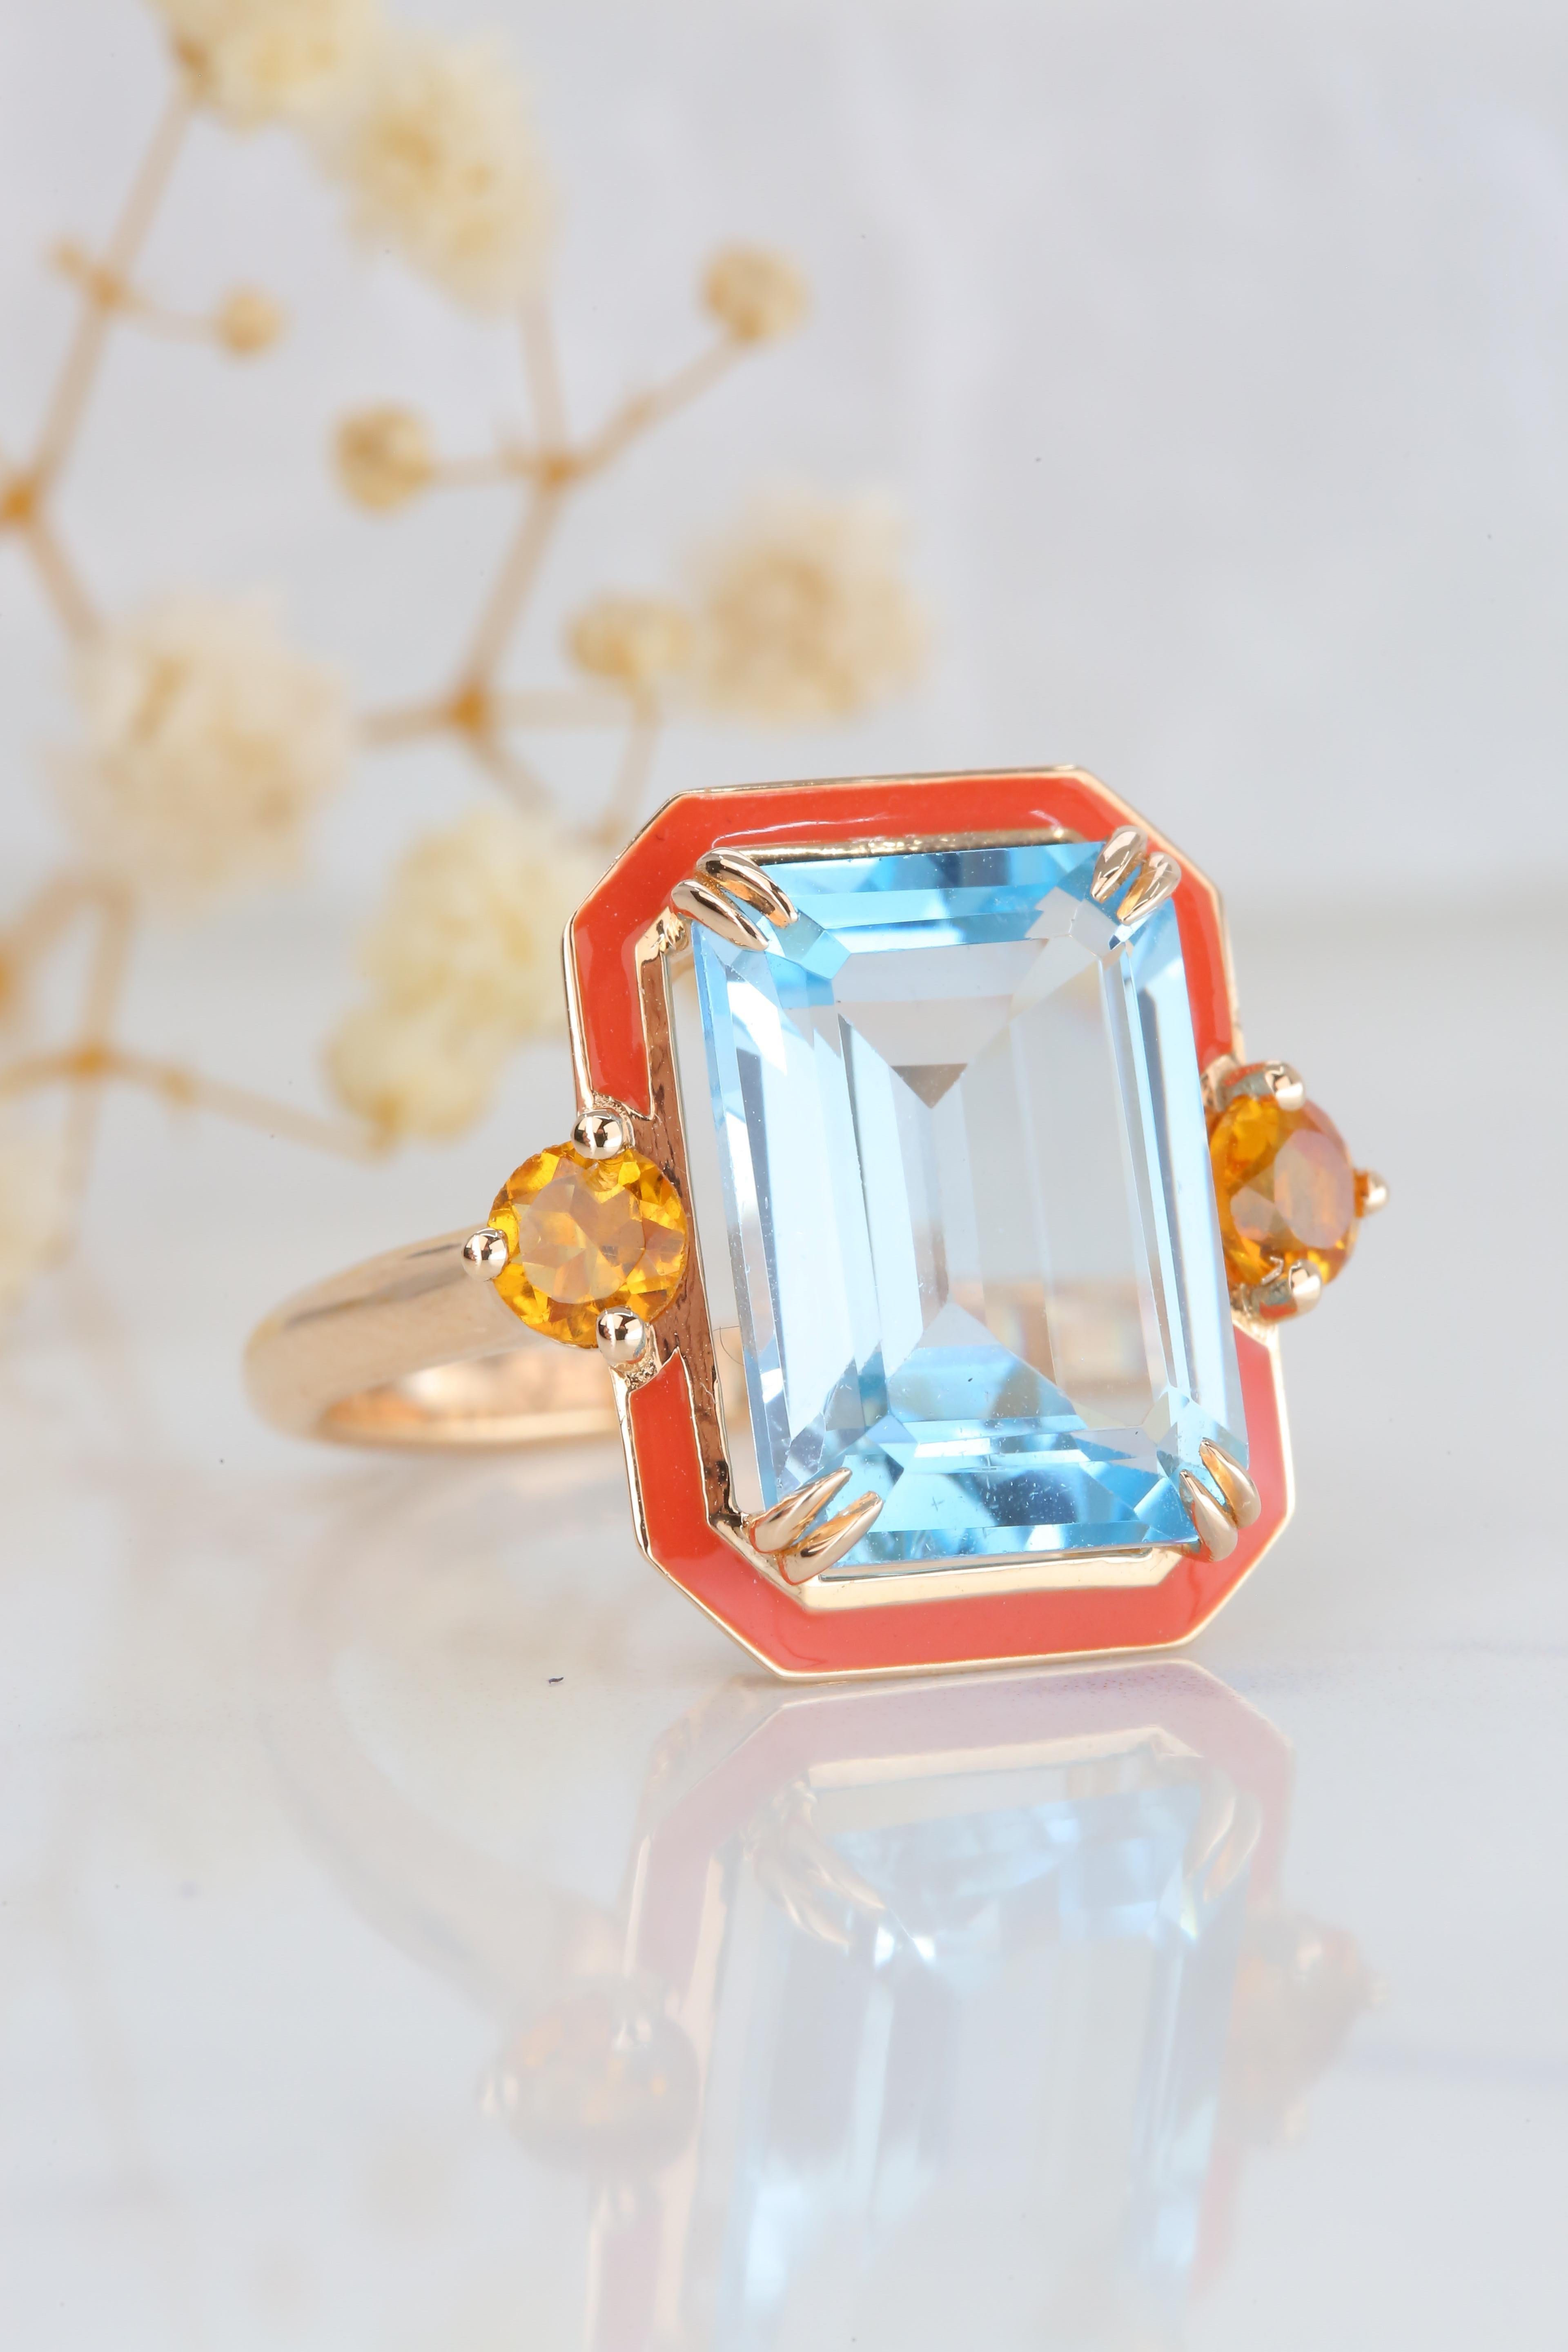 For Sale:  14K Gold Artdeco Style Enameled Cocktail Ring with 5.68 Ct Sky Topaz and Citrine 3